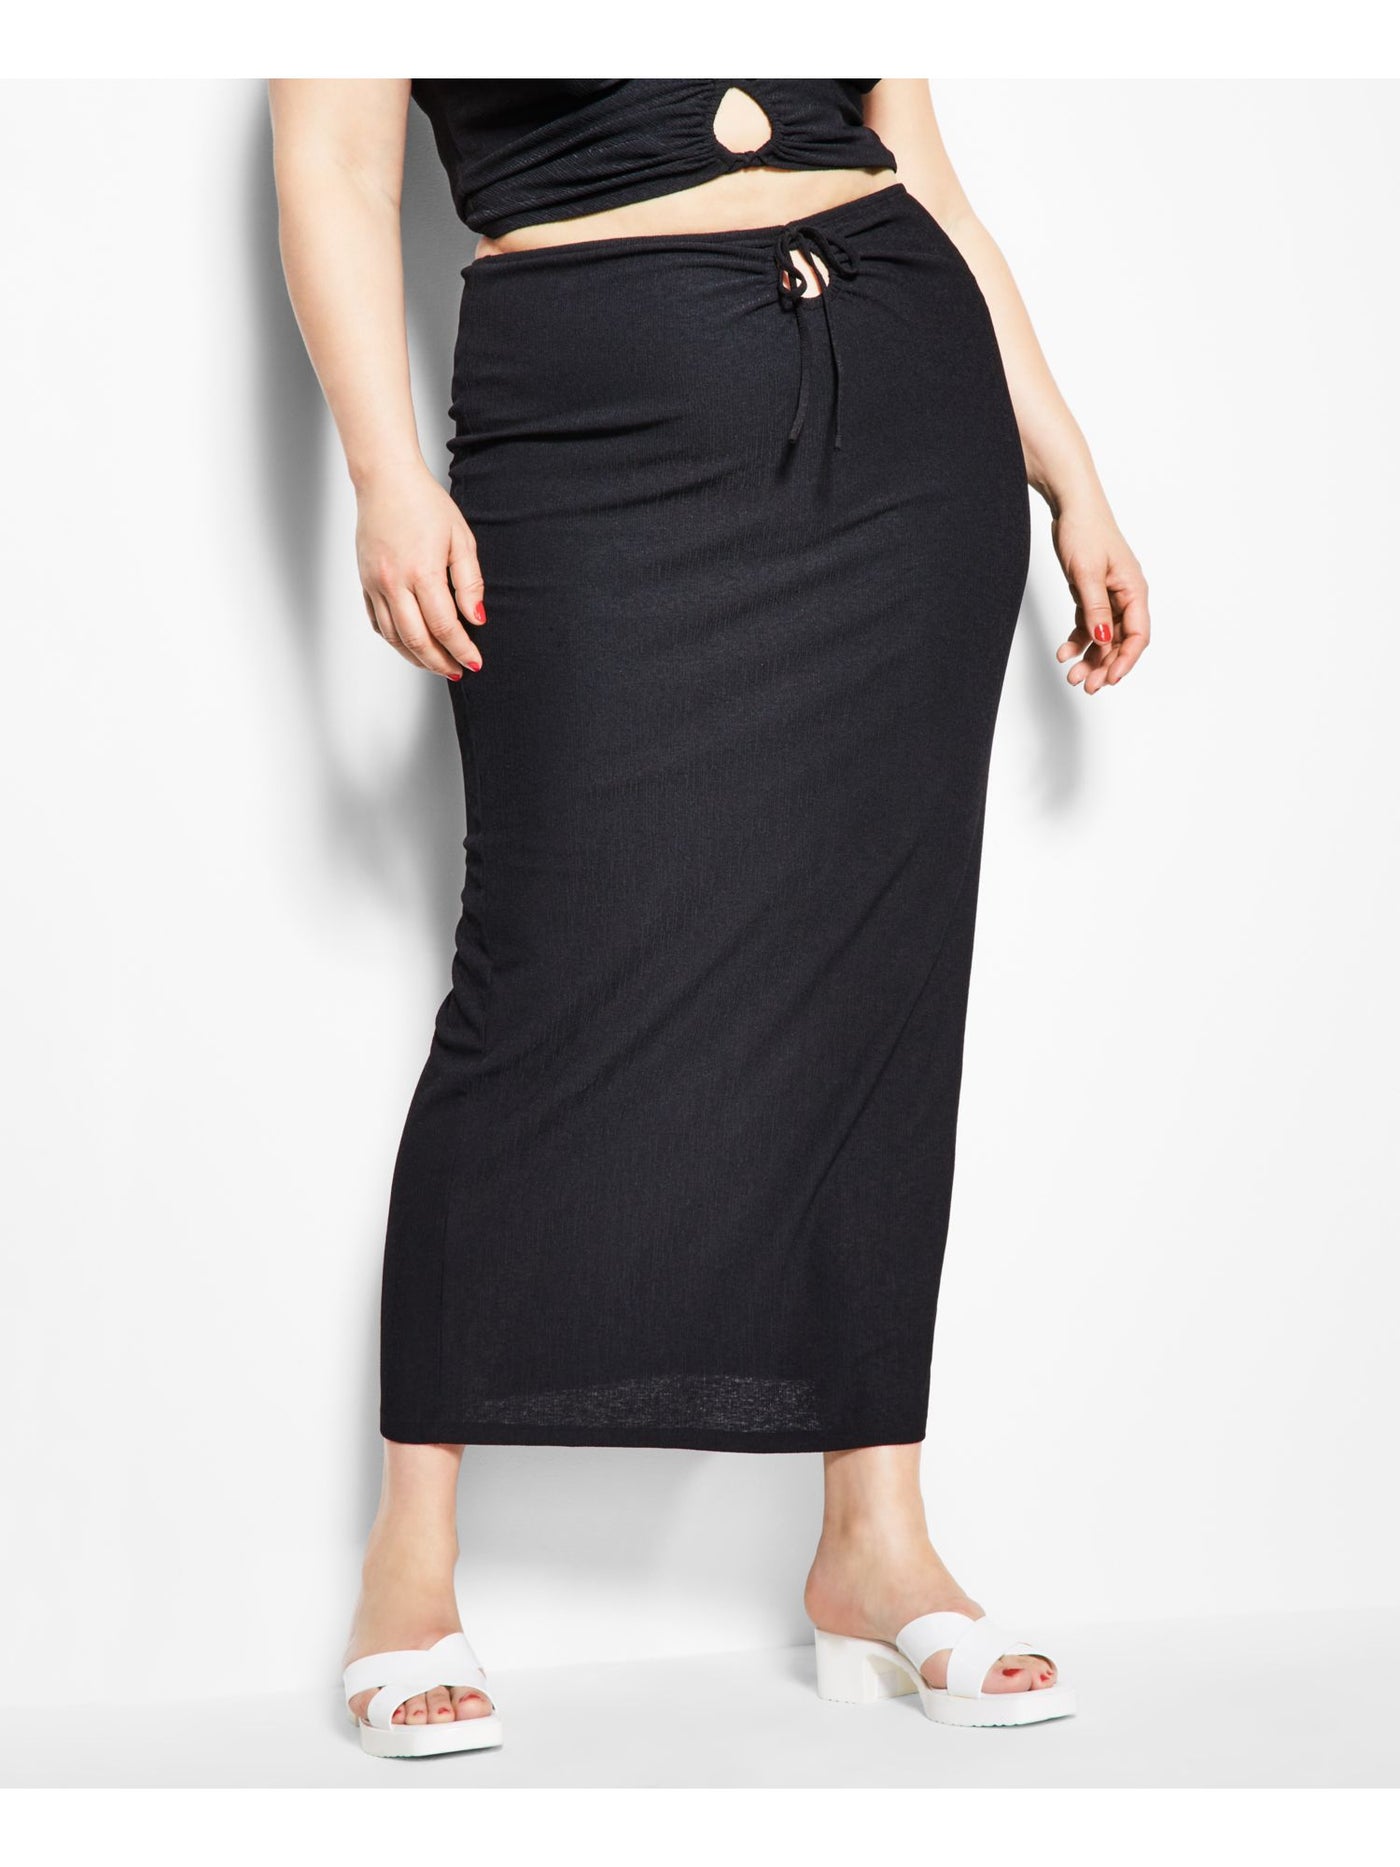 ROYALTY BY MALUMA Womens Black Ribbed Cut Out Pull-on Tie Detail Maxi Pencil Skirt S